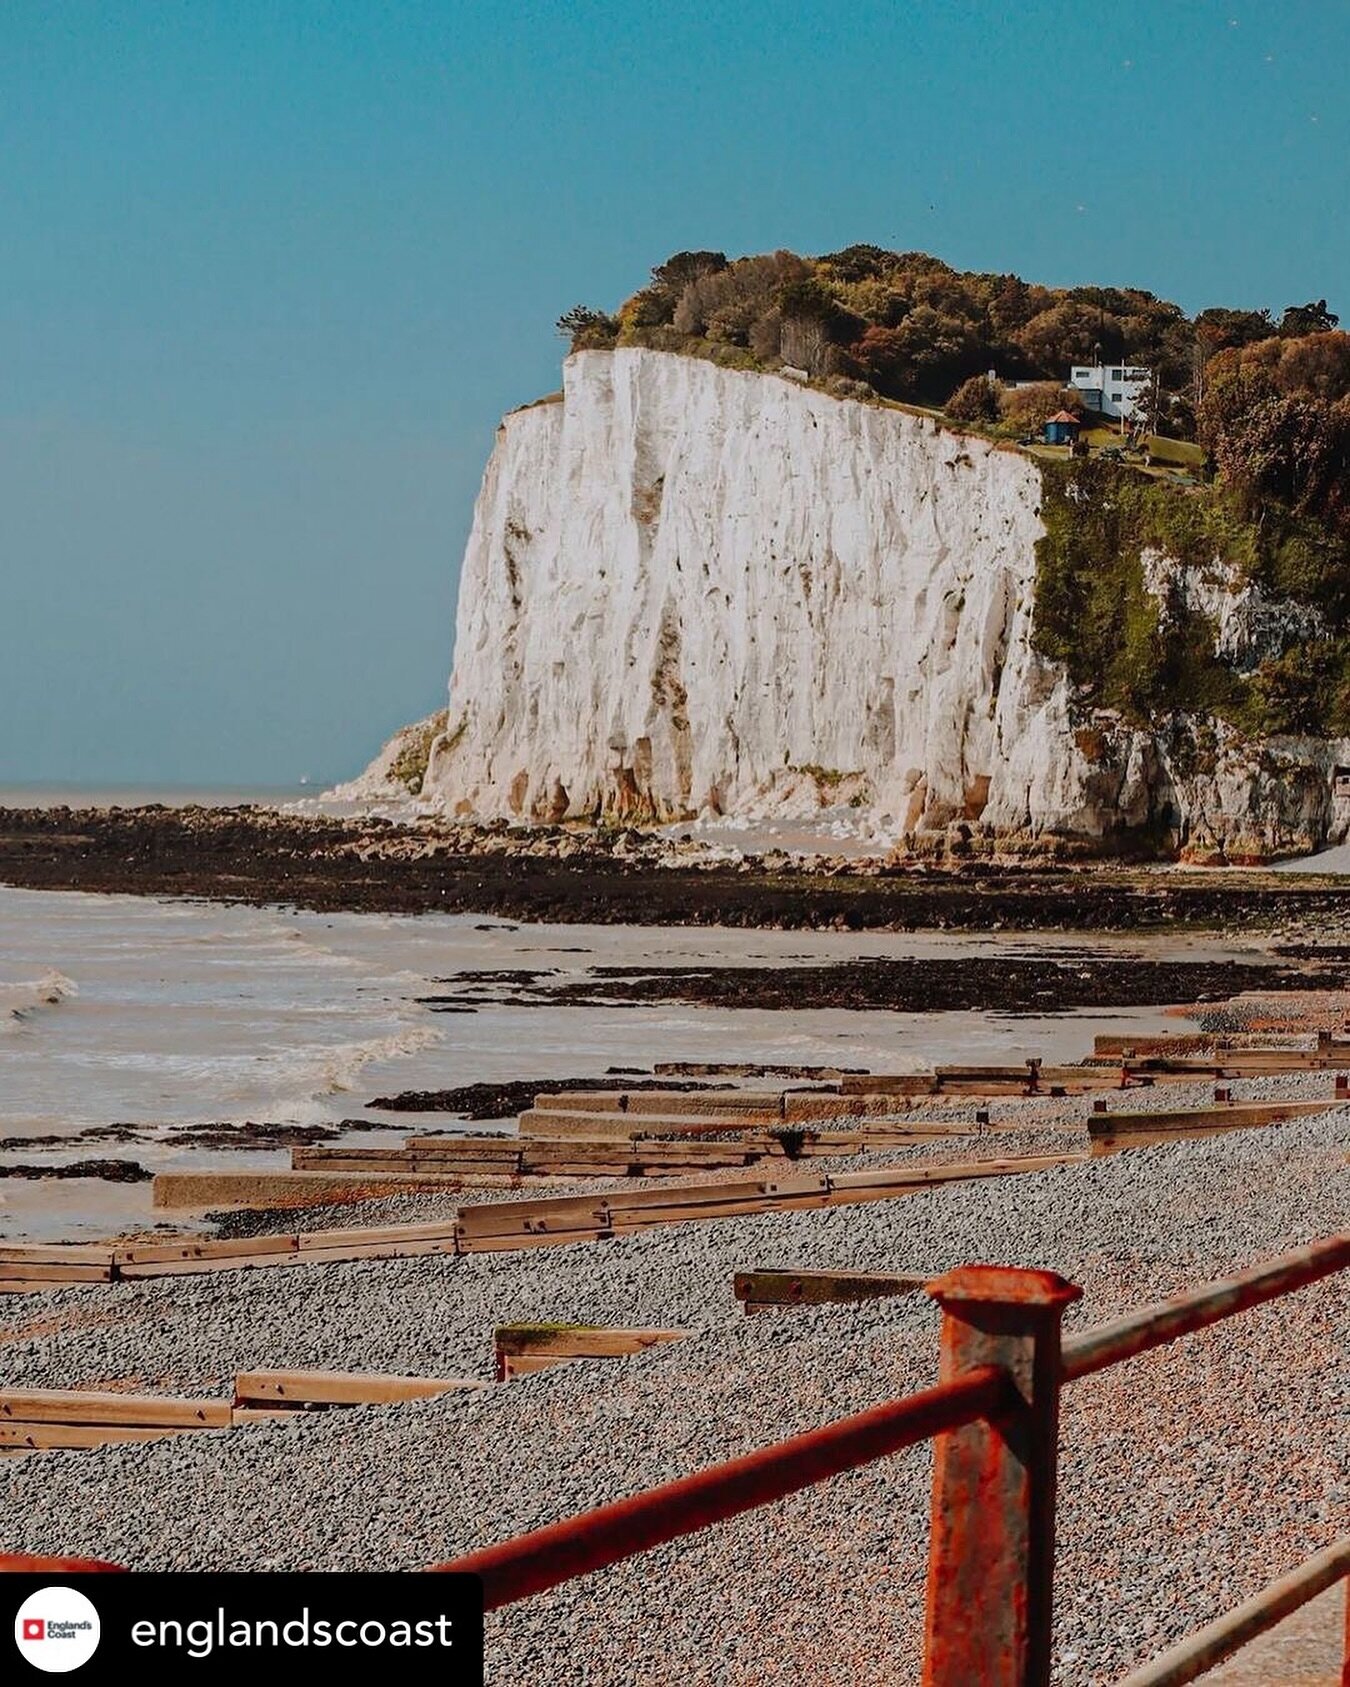 Posted @withregram &bull; @englandscoast 💙 St Margaret&rsquo;s Bay 💙

Have you explored White Cliffs Country? The coastline around Dover, Deal and Sandwich in Kent is full of lovely surprises 🙌

📸 Photo by @amyscphotos 

To be featured tag @engla